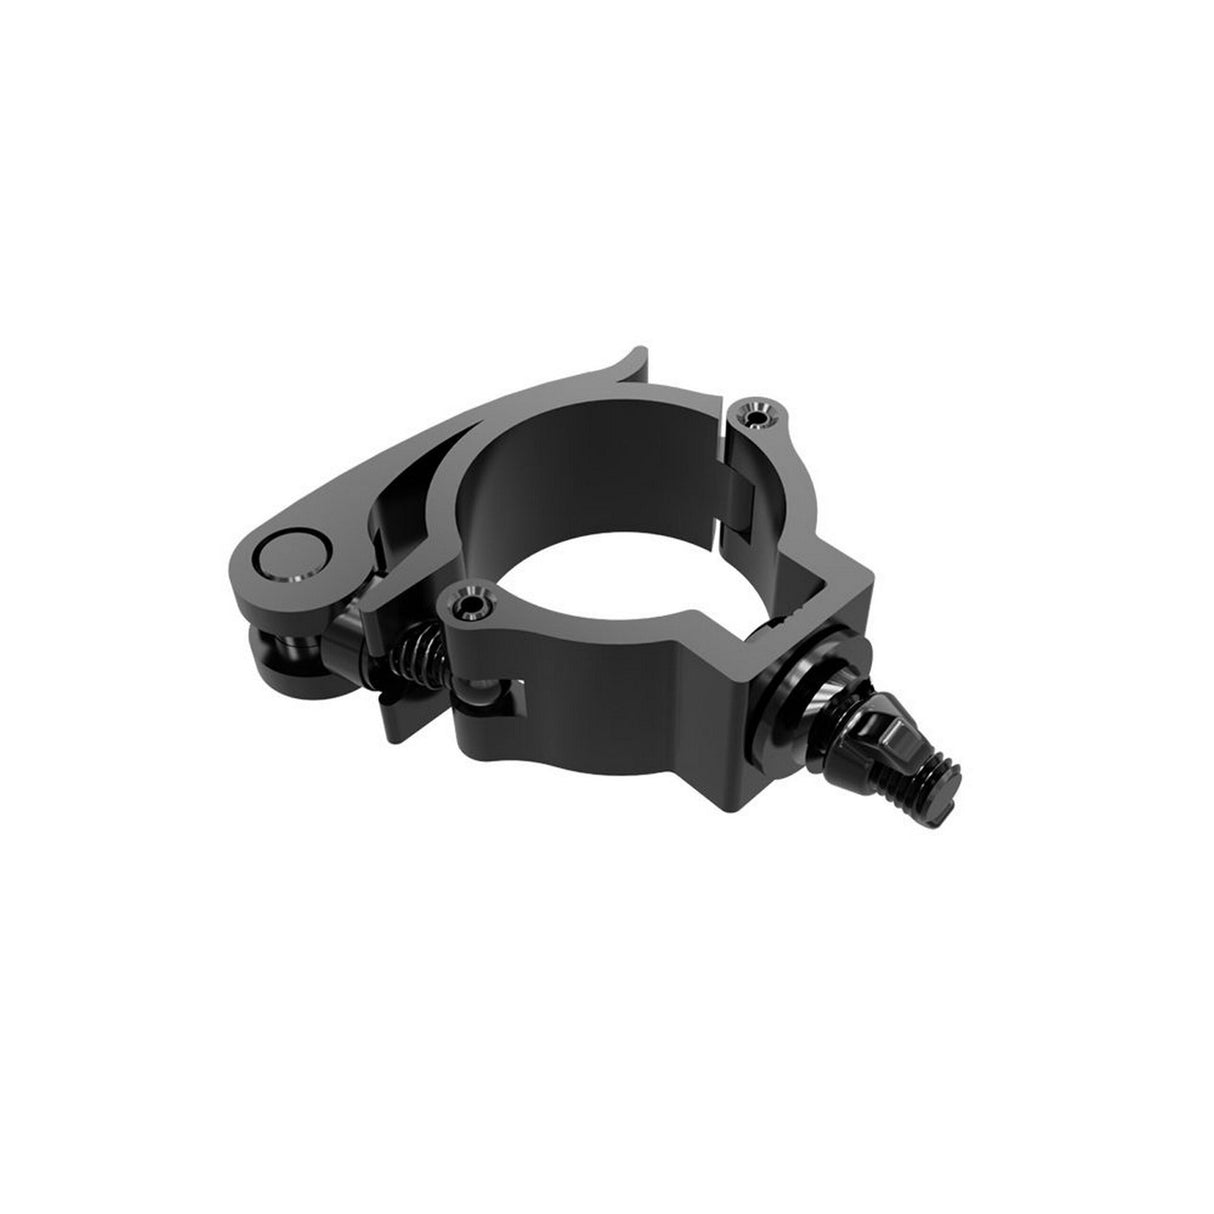 Global Truss Light Duty Clamp for F23/F24 with Quick Release Handle, Black